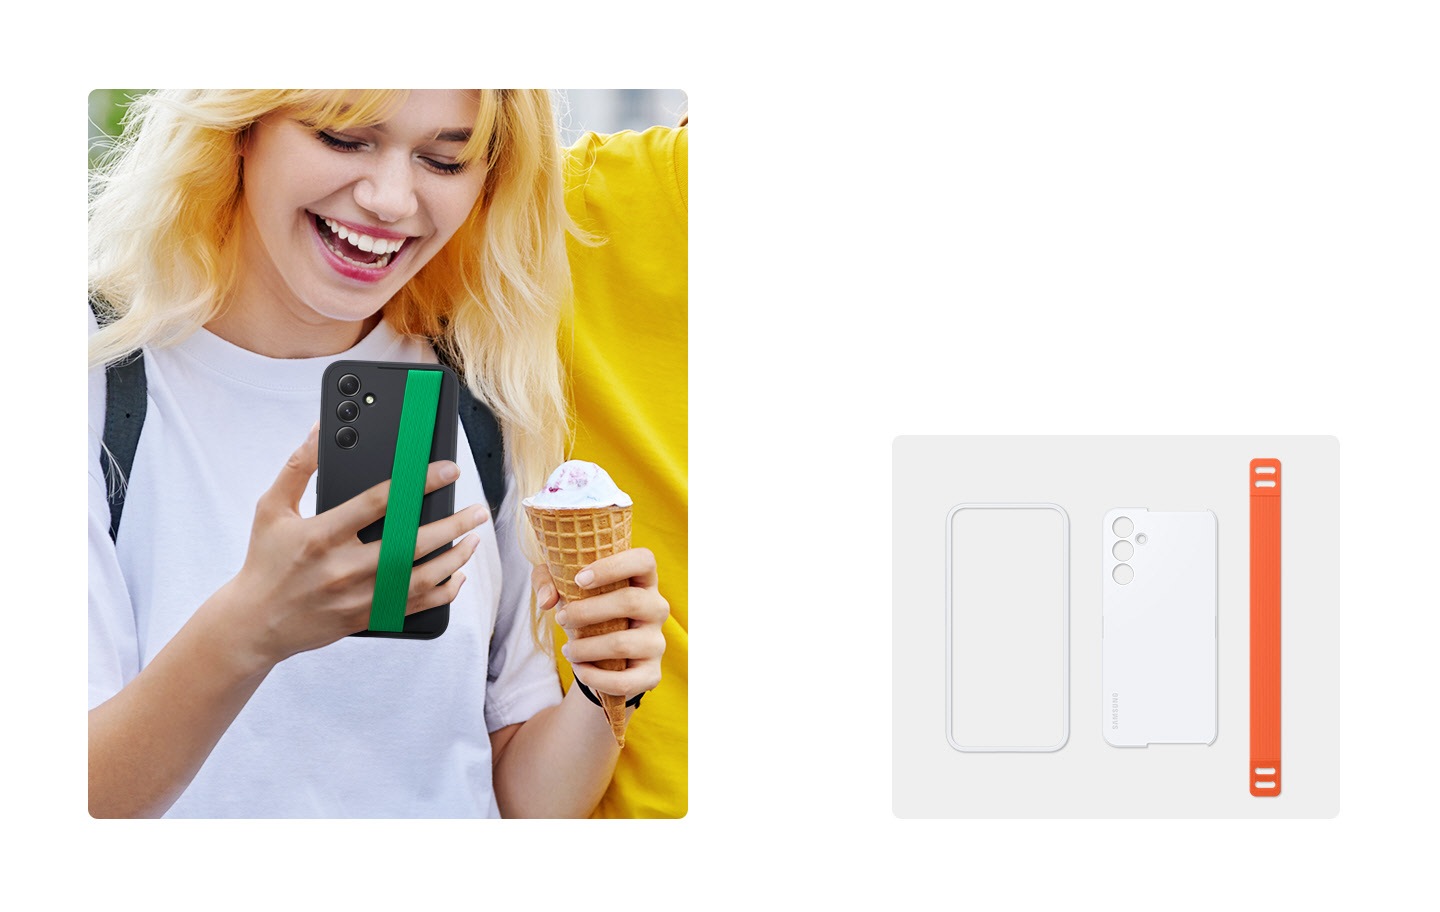 On the left, a woman smiling is looking at her Galaxy device wearing a black Haze Grip Case with a green strap while holding an ice cream cone on the other hand. On the right, the frame and back plate of a white Haze Grip Case as well as an orange strap are lined up.